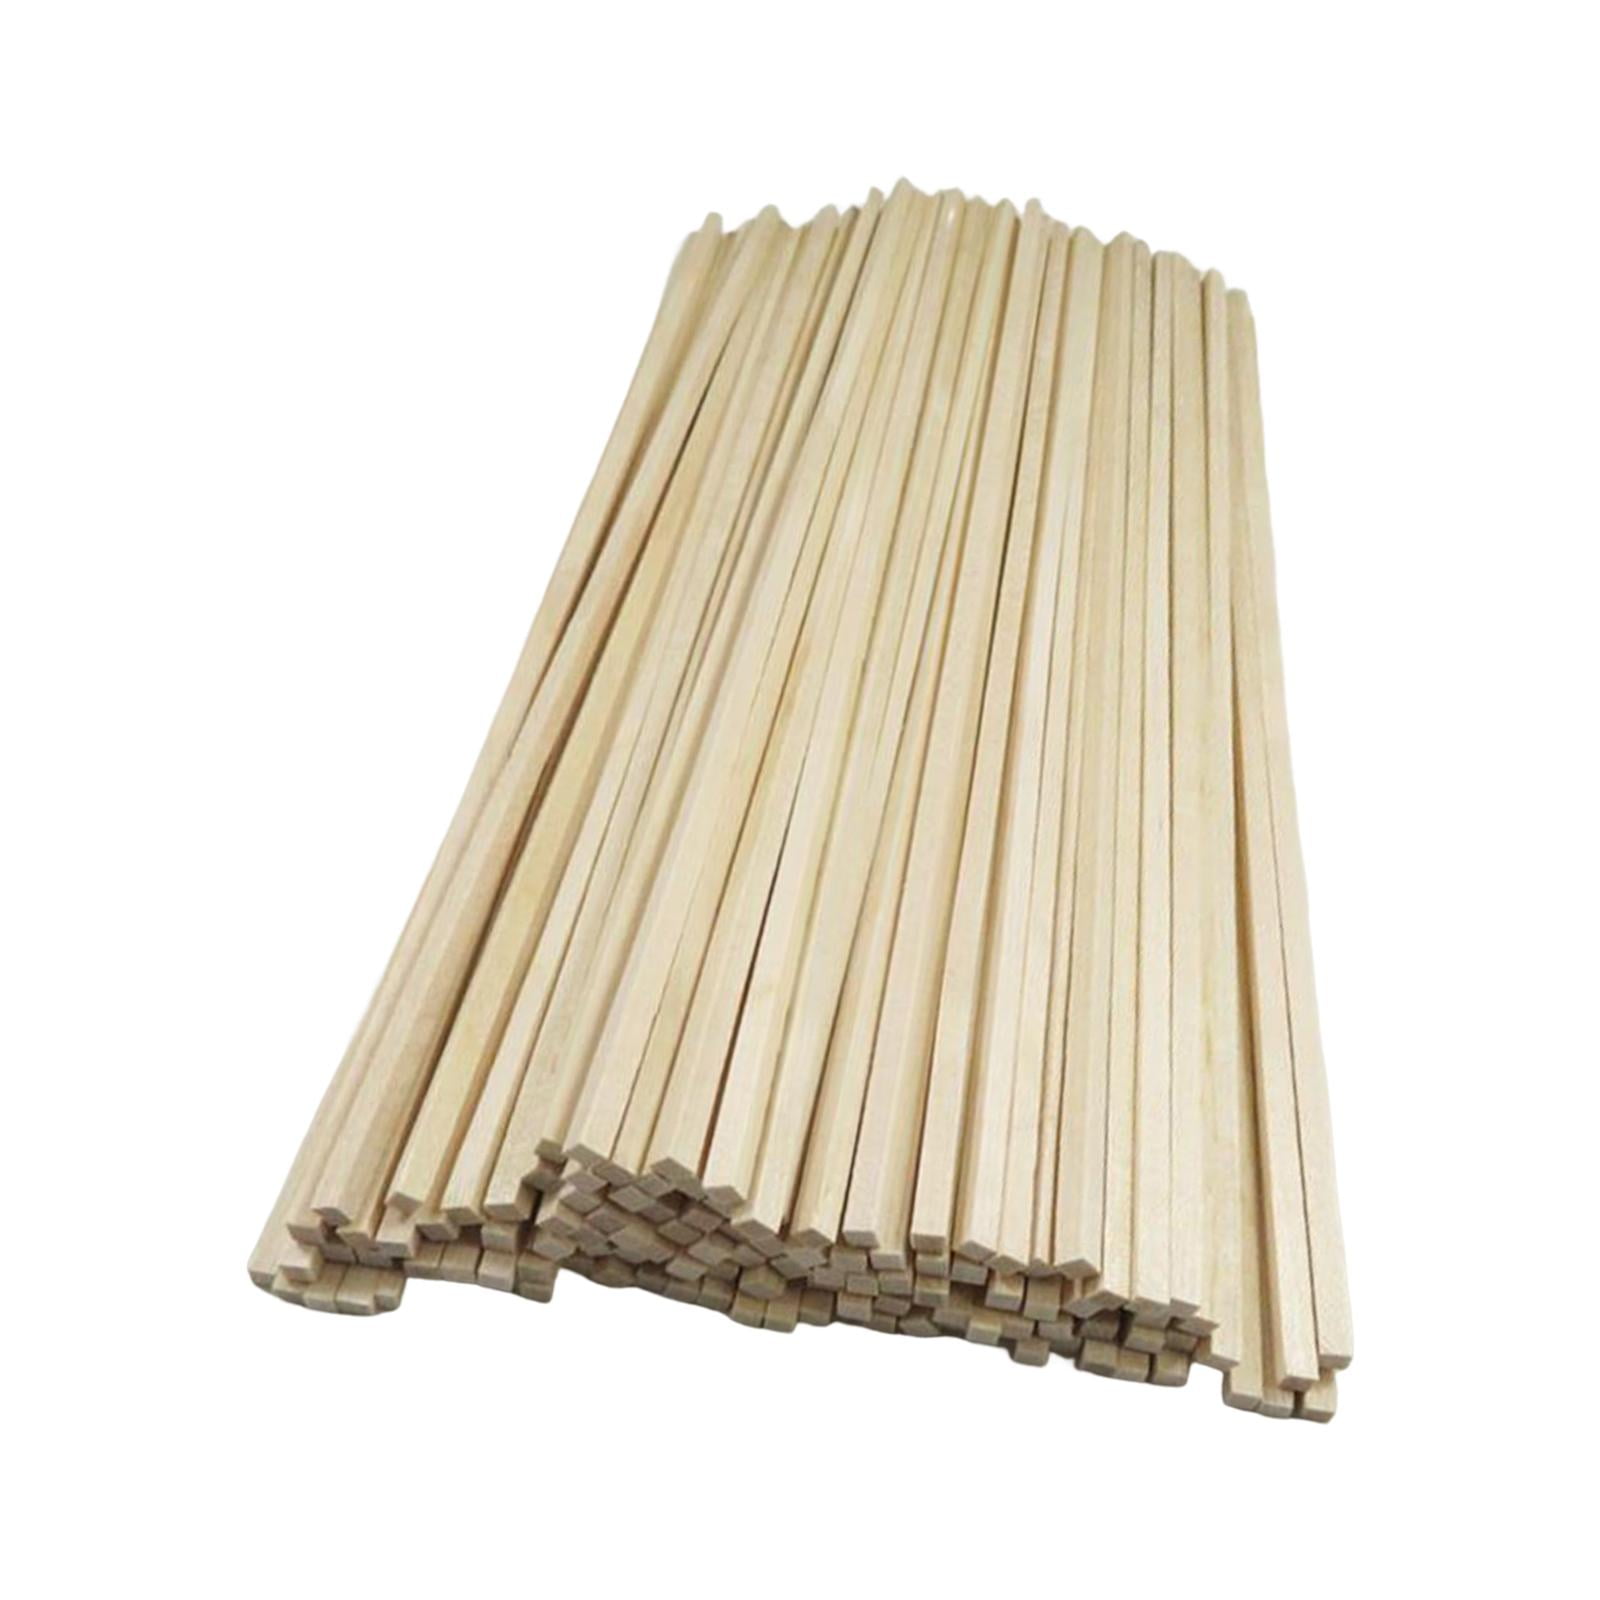 HJZALMI Square Wood Dowel Rod, Natural Long Dowel Strips, Unfinished Wood  Strips for Crafts DIY Projects Models Making Supplies, Customization  Support